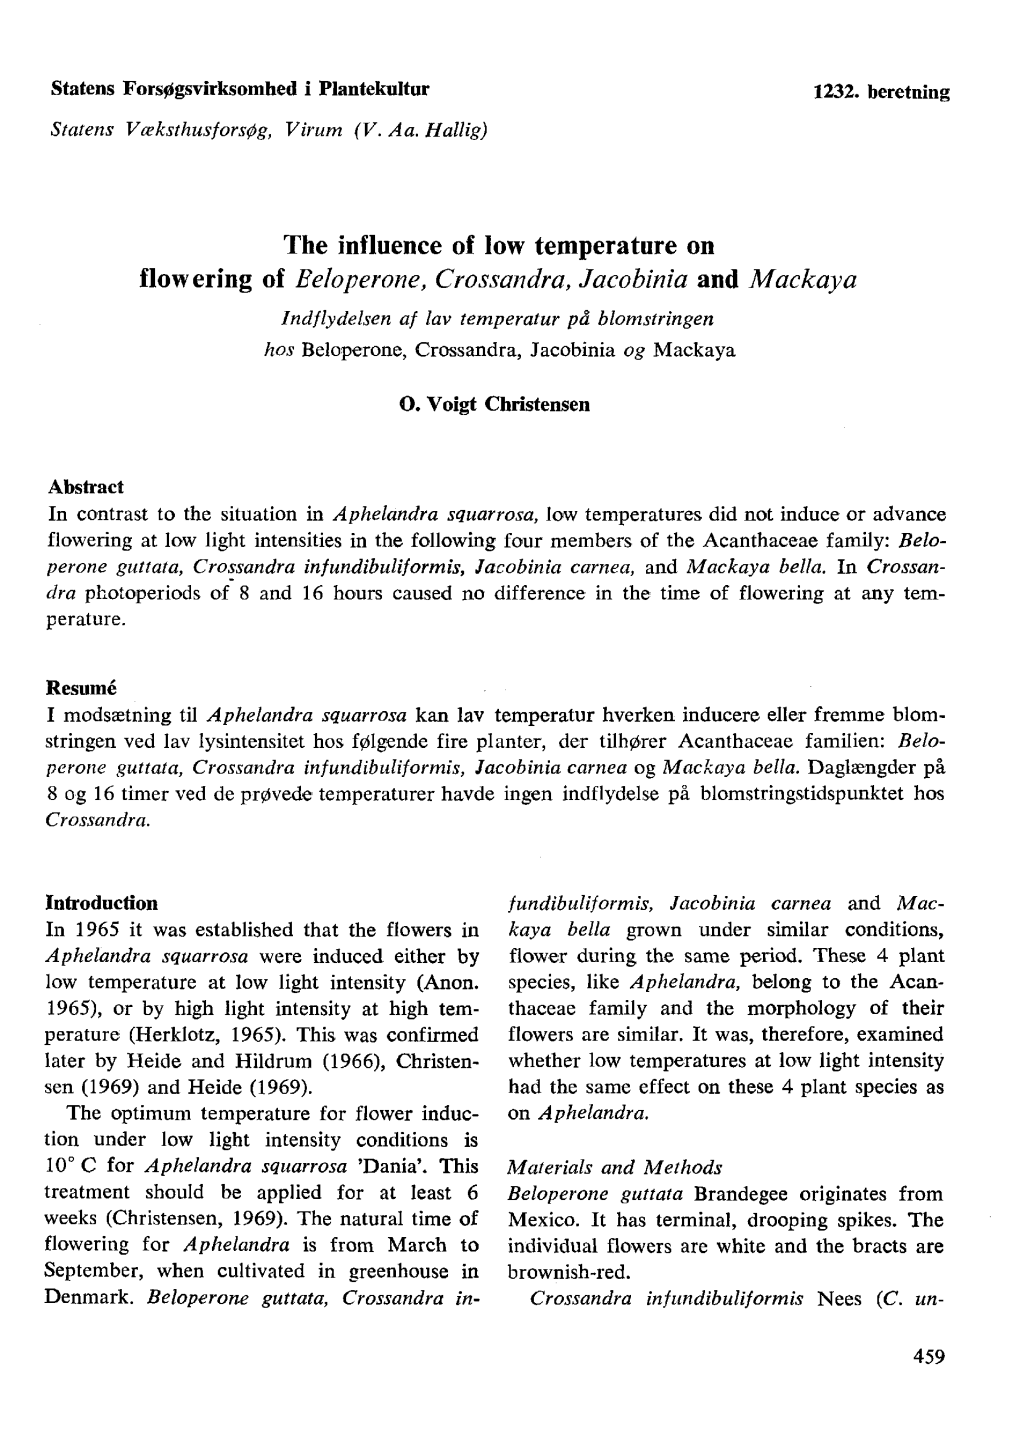 The Influence of Low Temperature on Flowering of Beloperone, Crossandra, Jacobinia and Mackaya